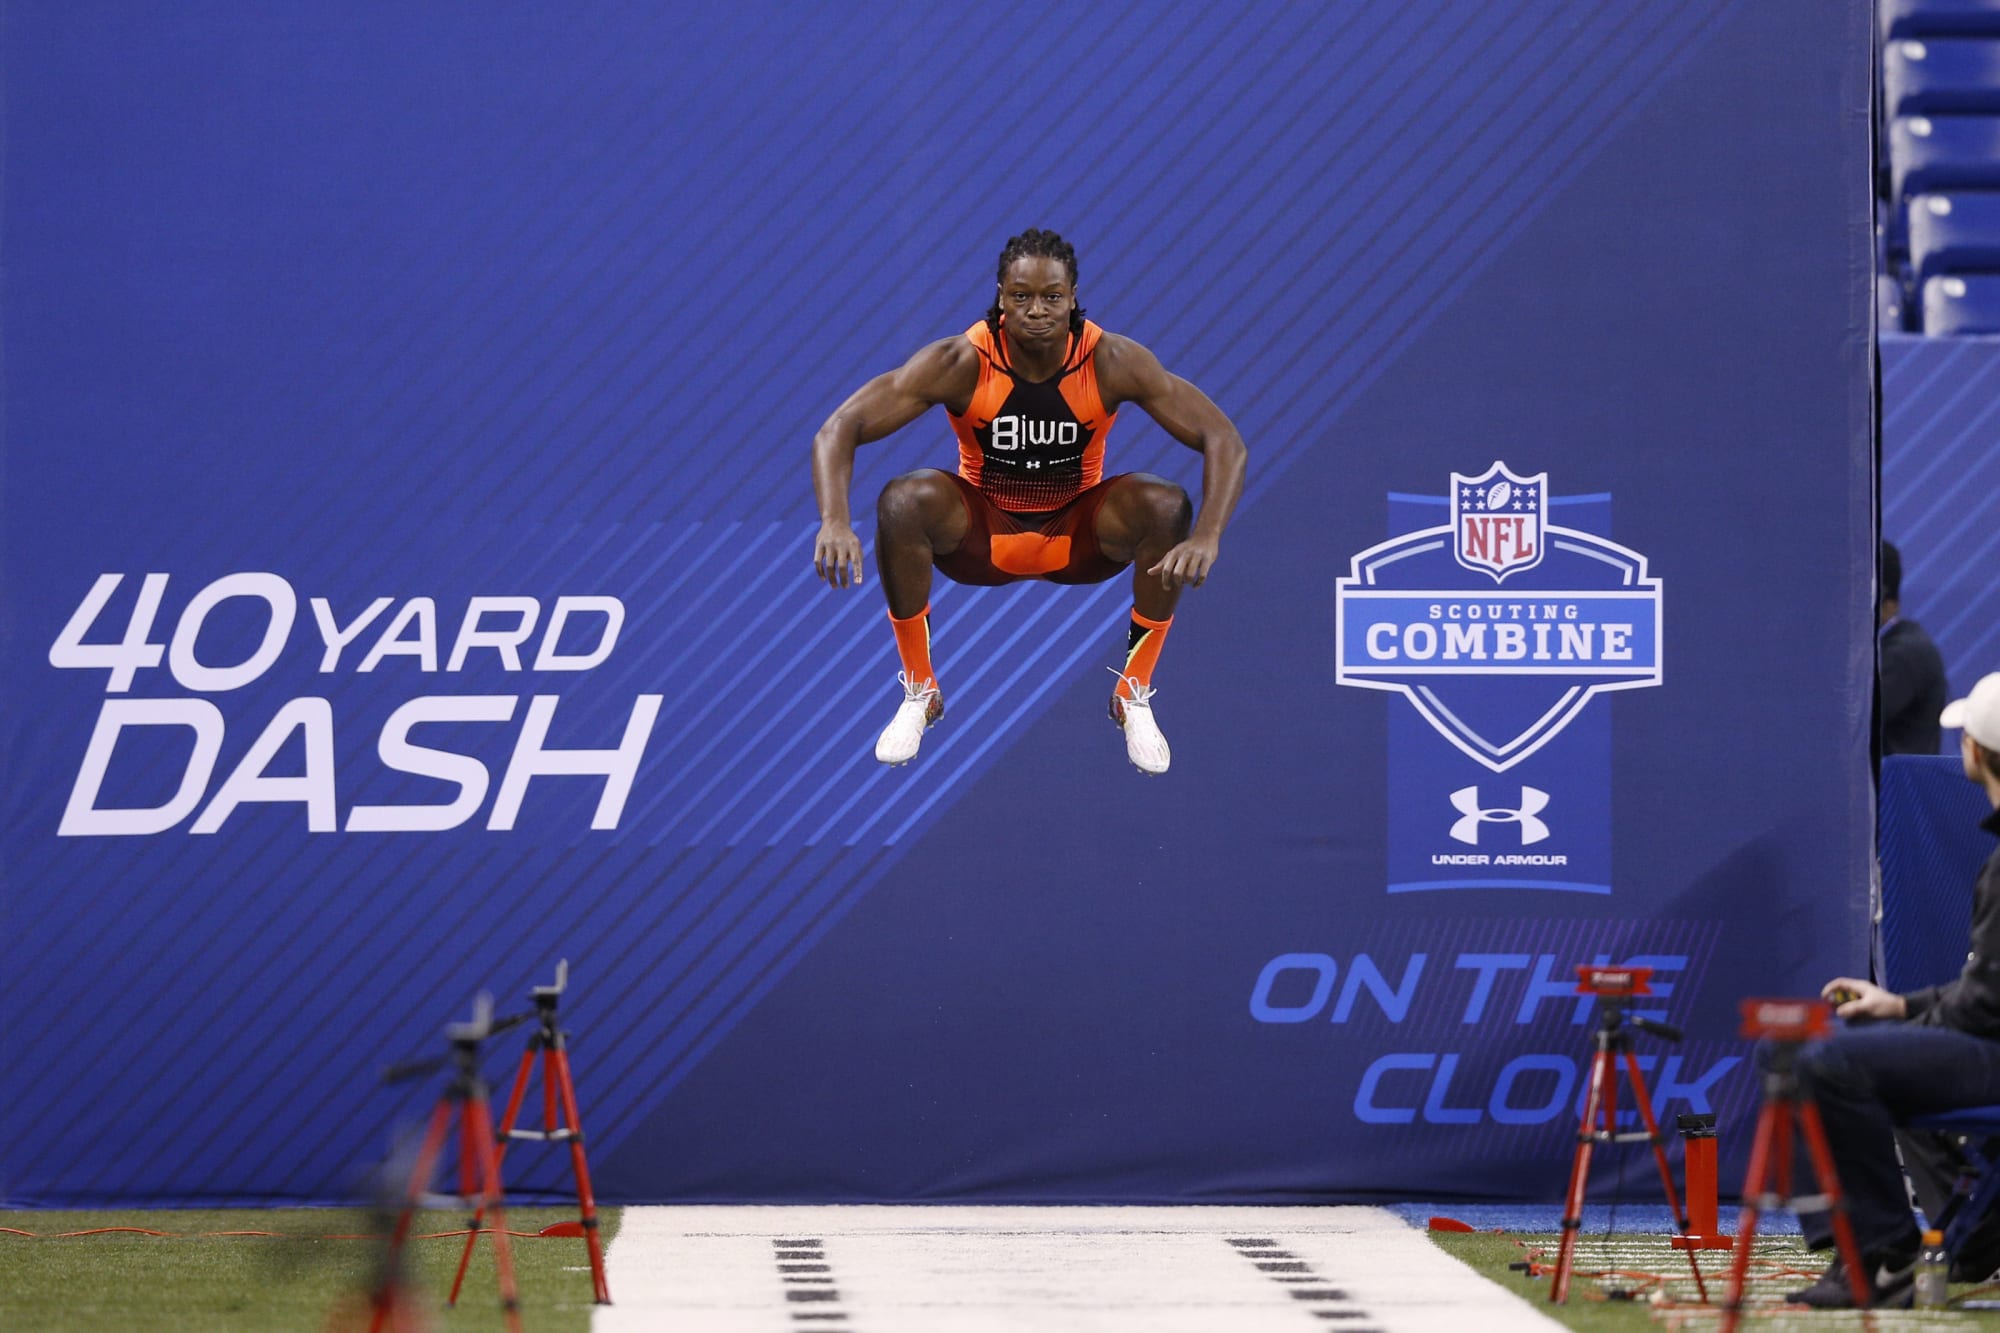 NFL Combine records for 40yard dash, bench press and every major drill